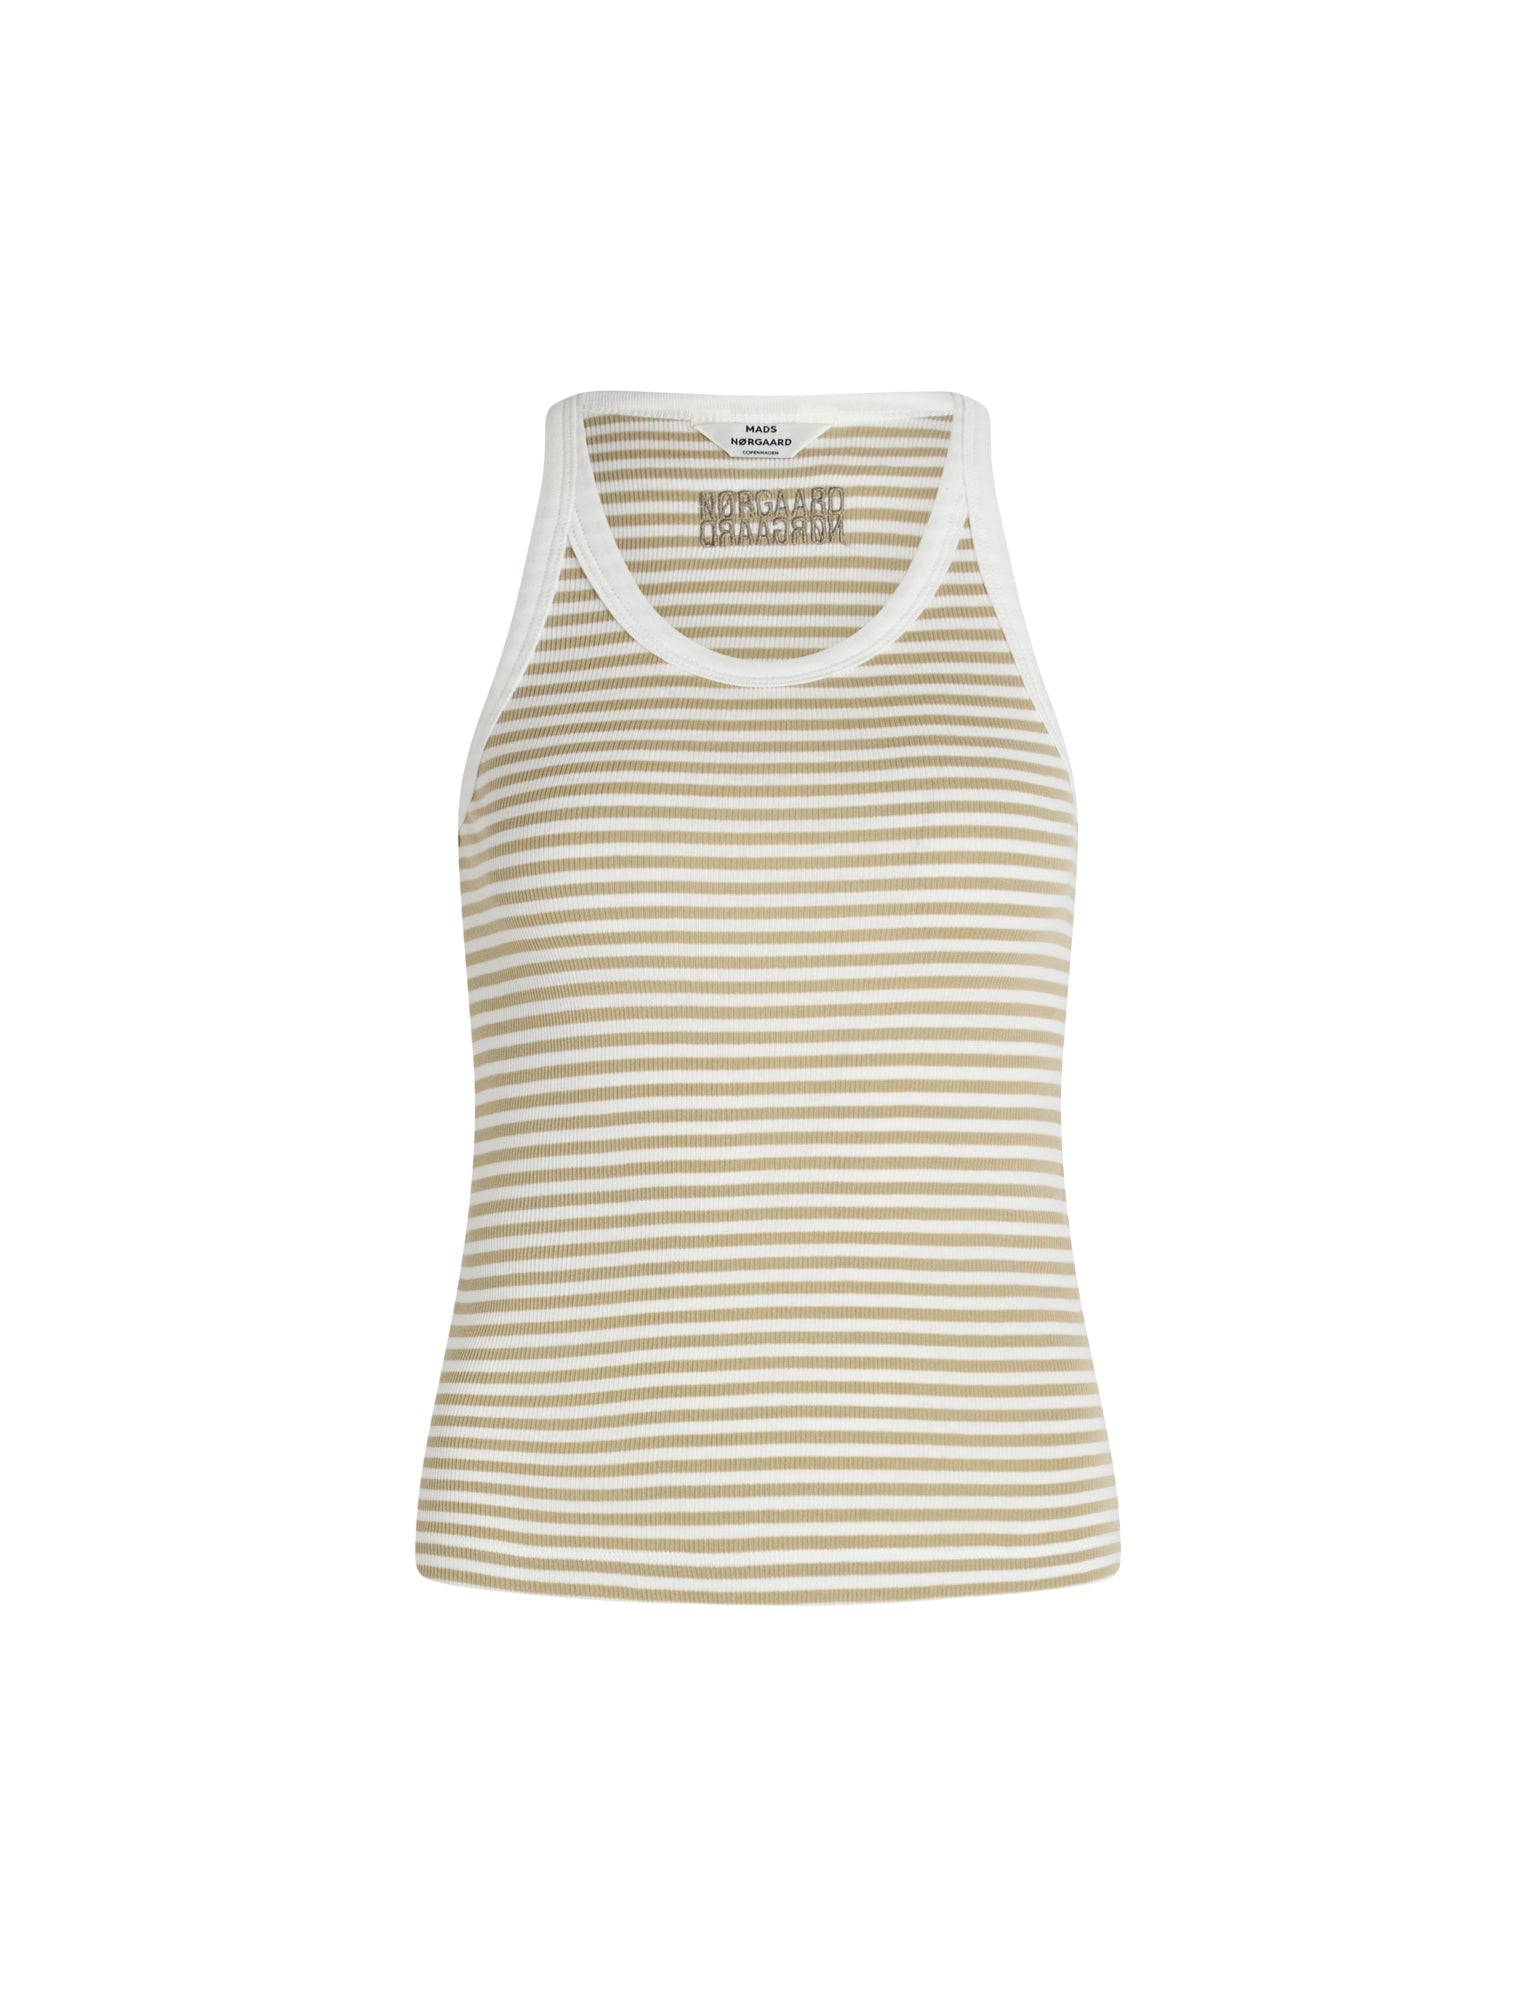 Mads Norgaard Cotton Stripe Carry Top - Elm/White - White Feather Boutique